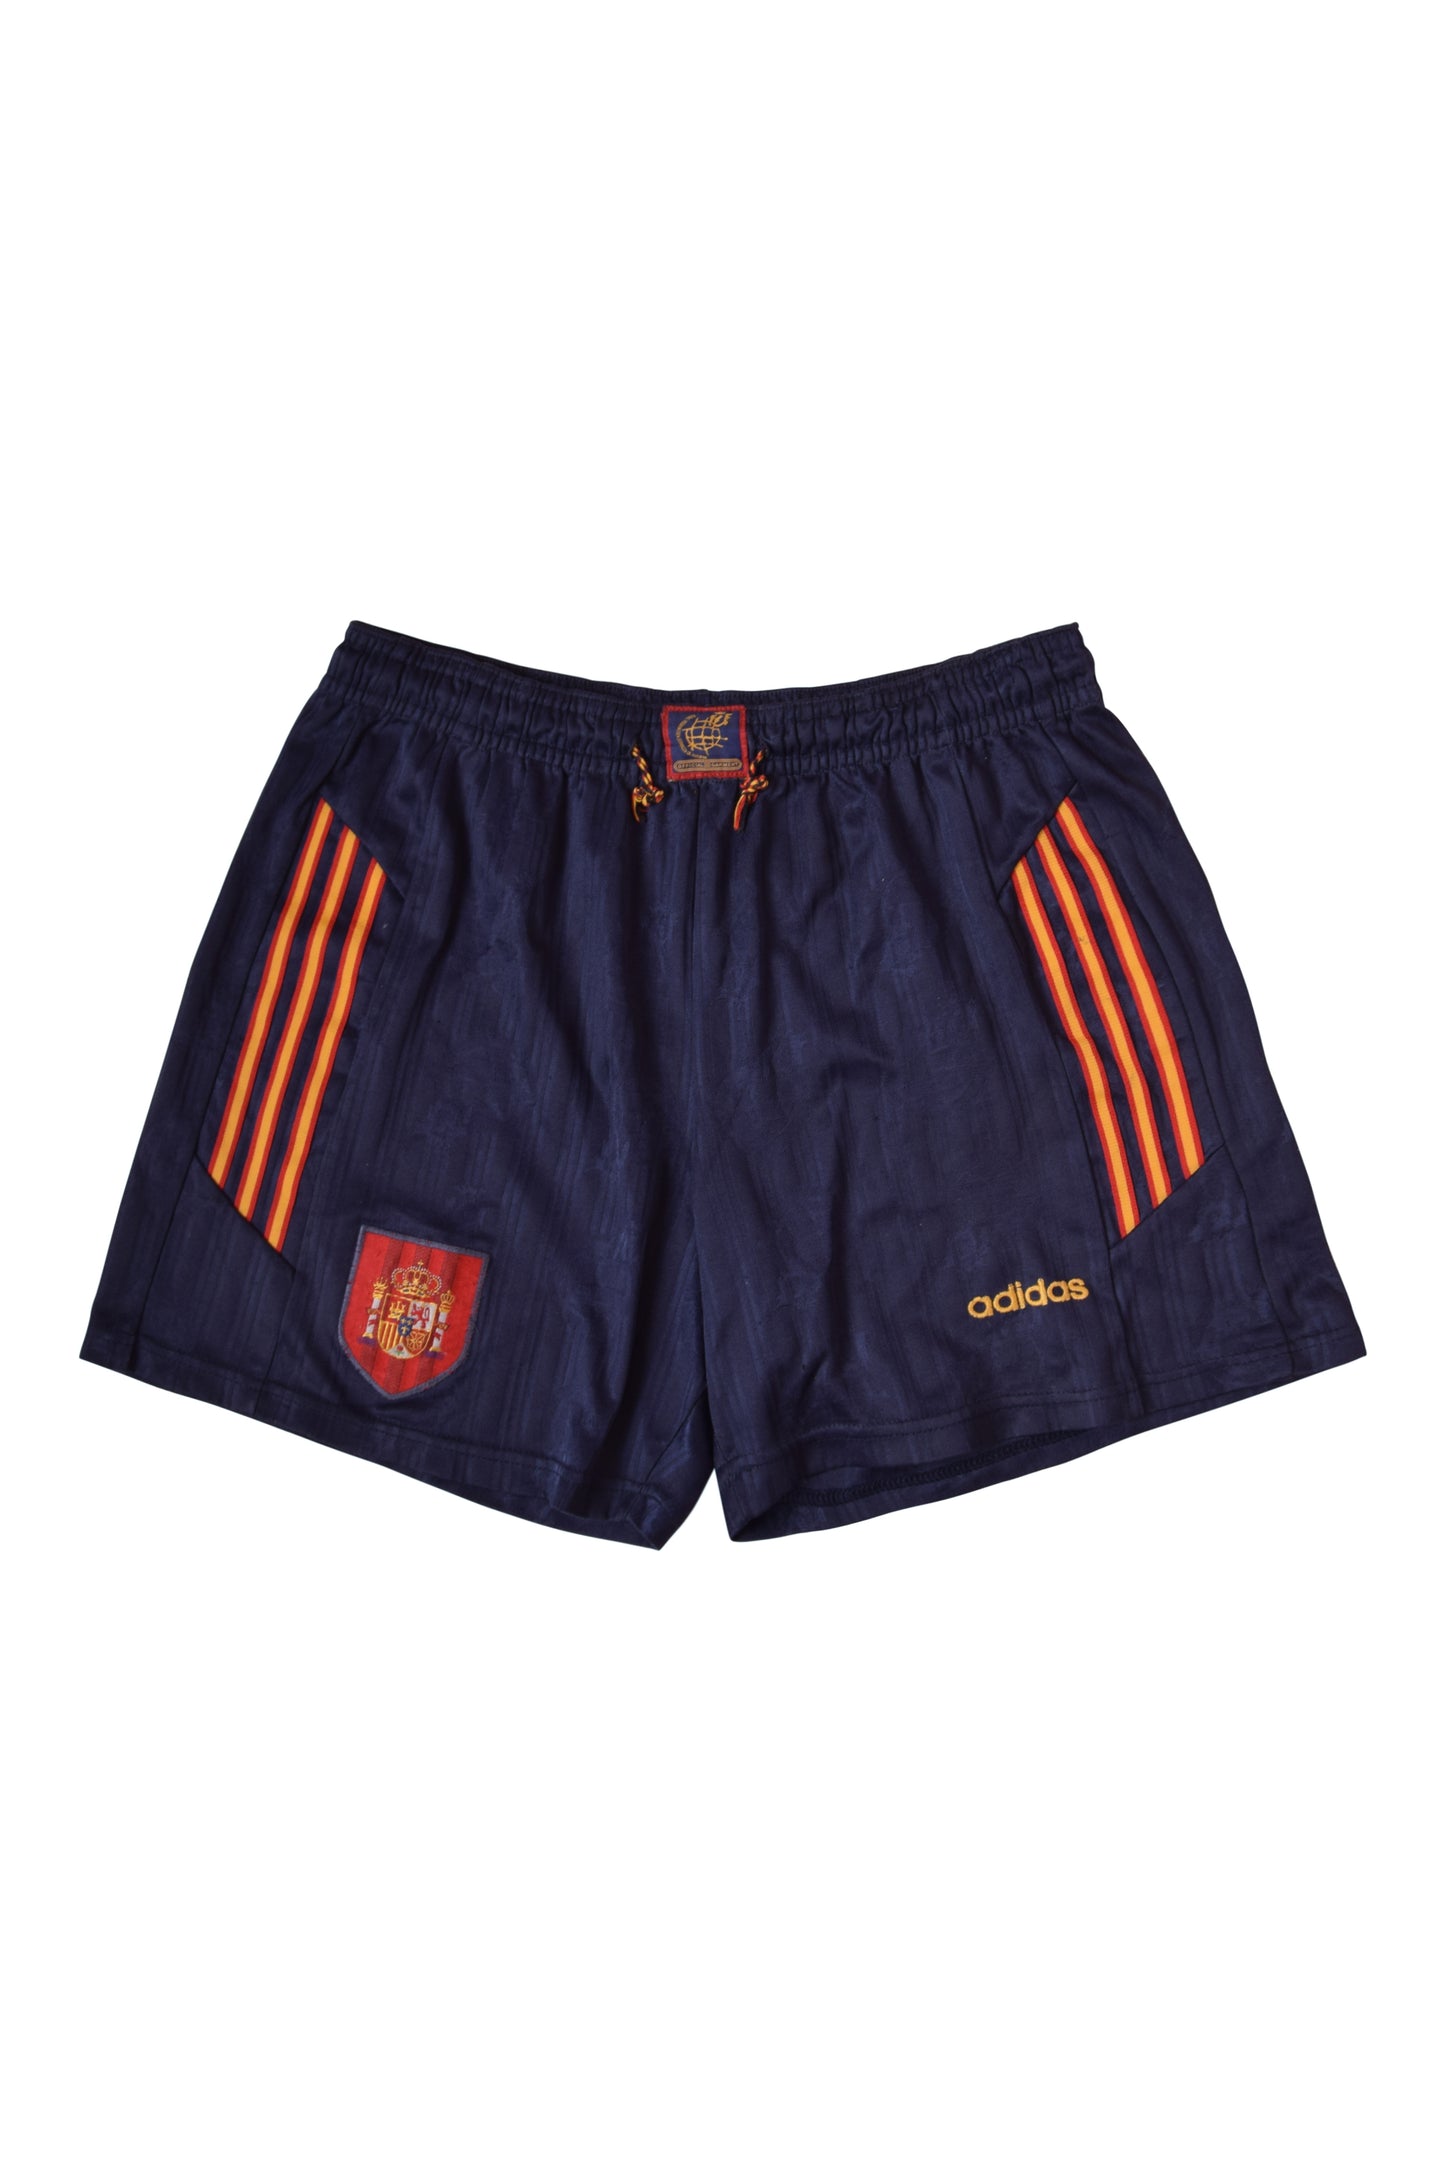 Vintage Spain Adidas 1996 - 1998 Shorts Size L Made in England Blue Euro 96